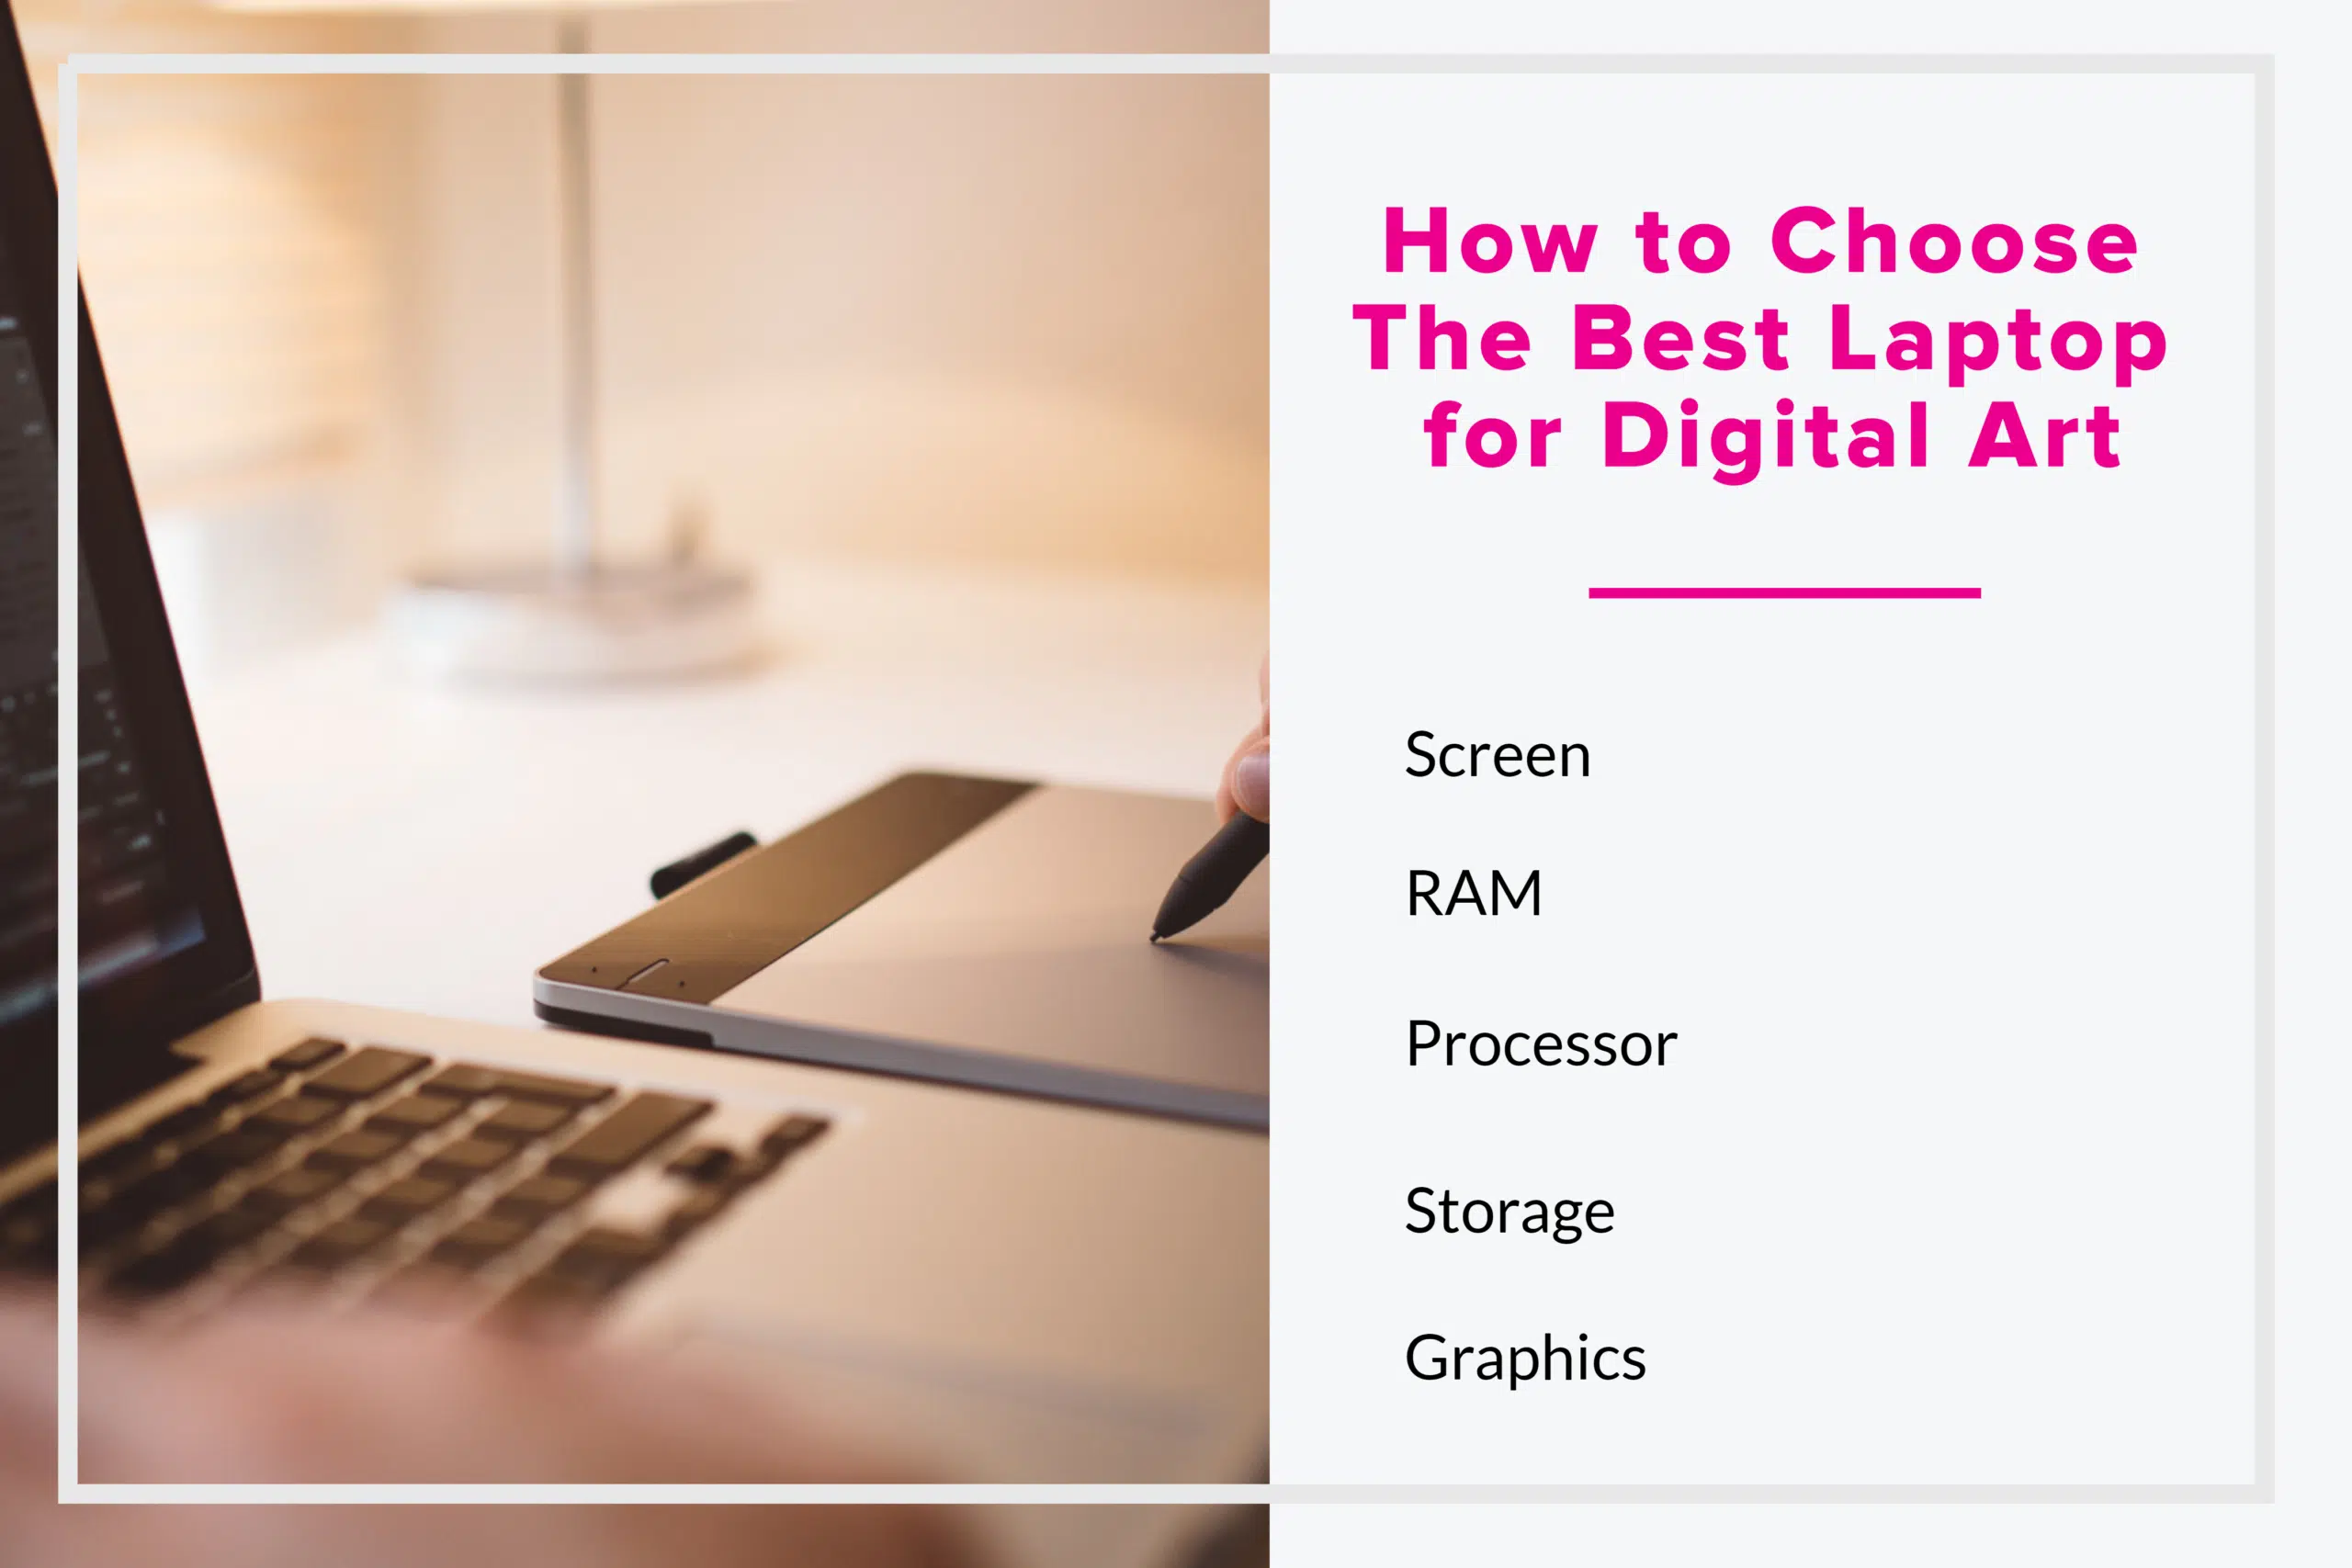 How to Choose The Best Laptop for Digital Art